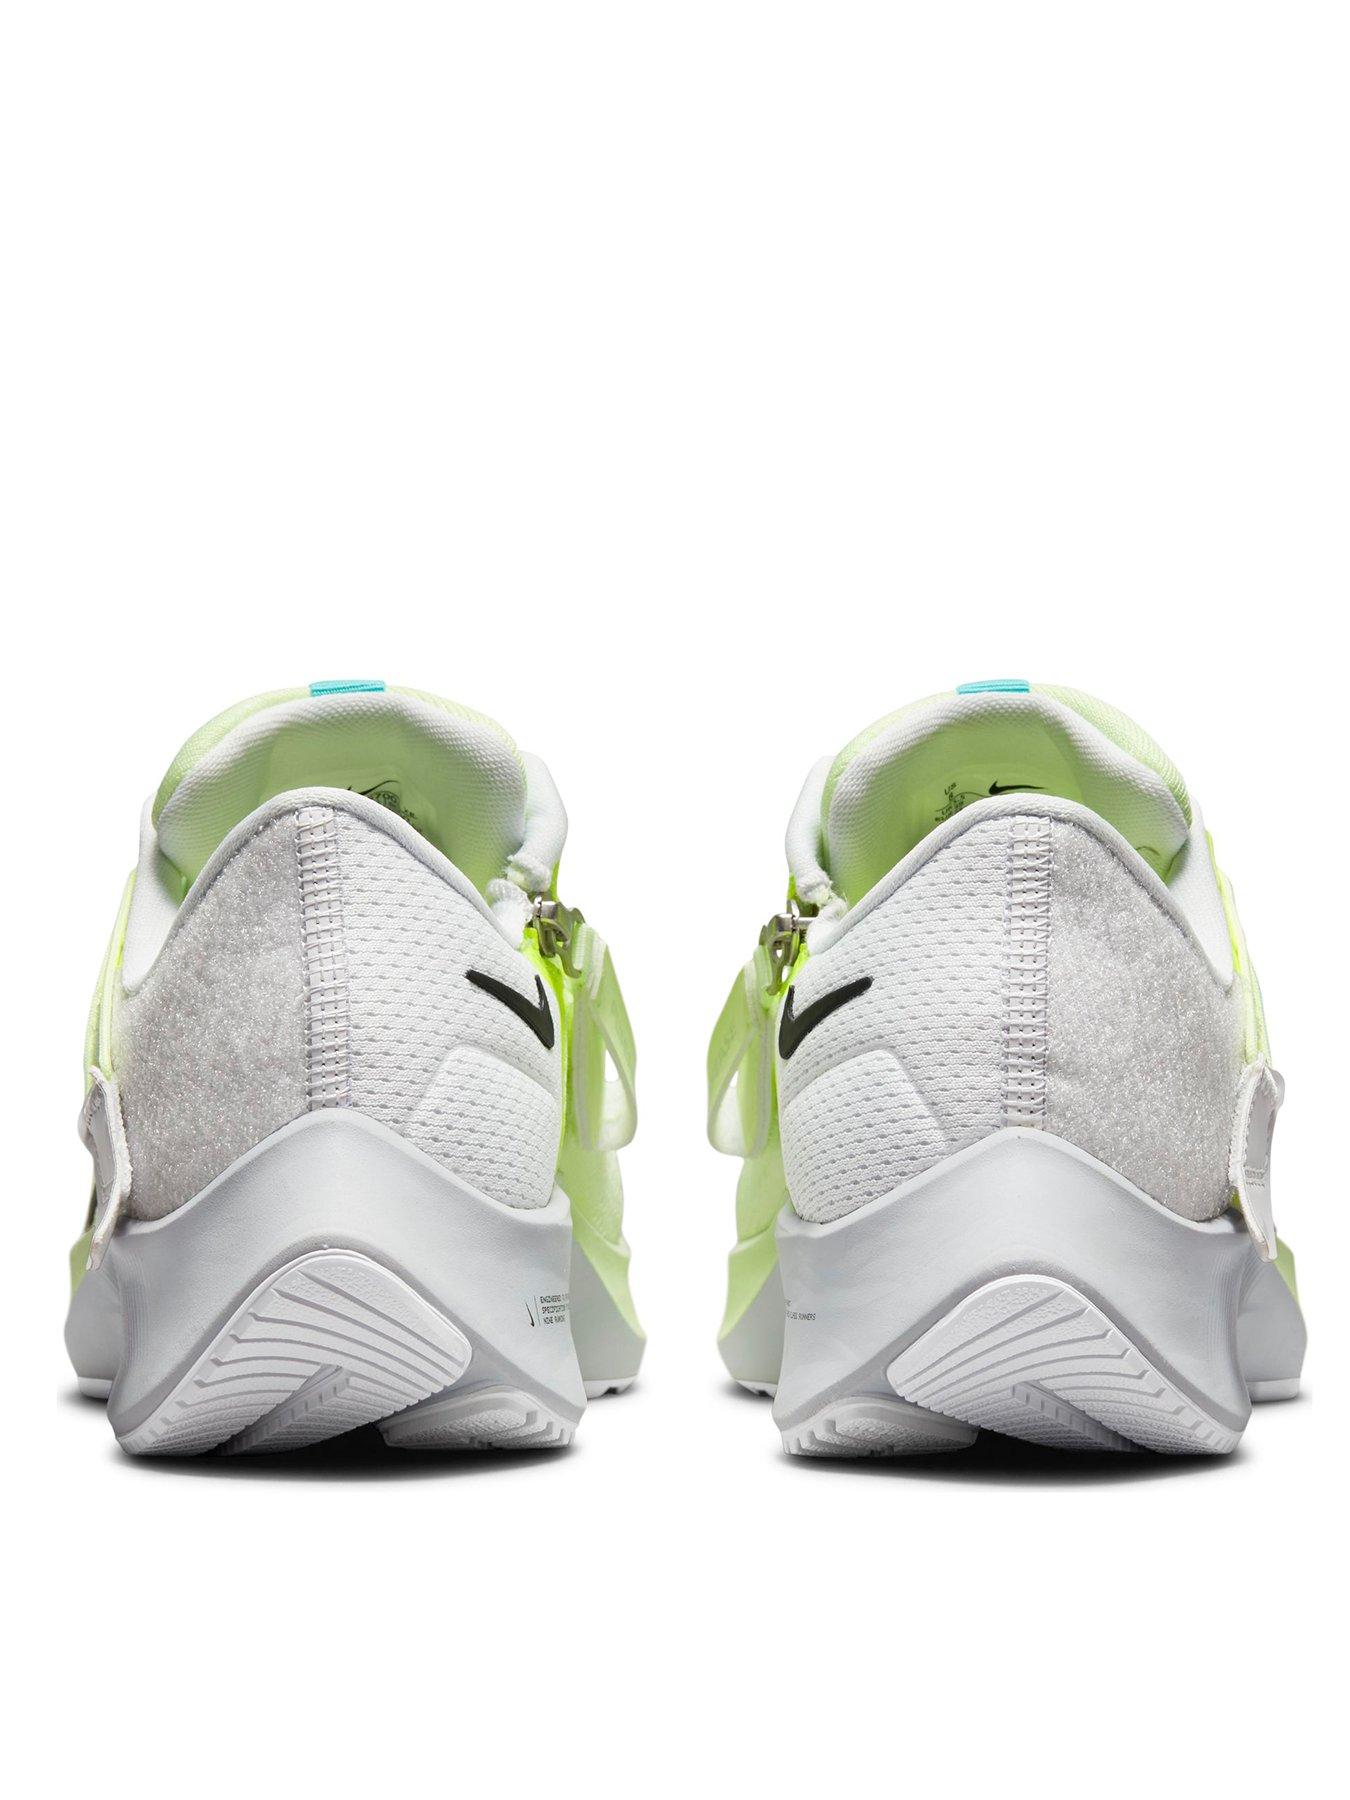 Trainers Air Zoom Pegasus 38 FlyEase - Volt/White